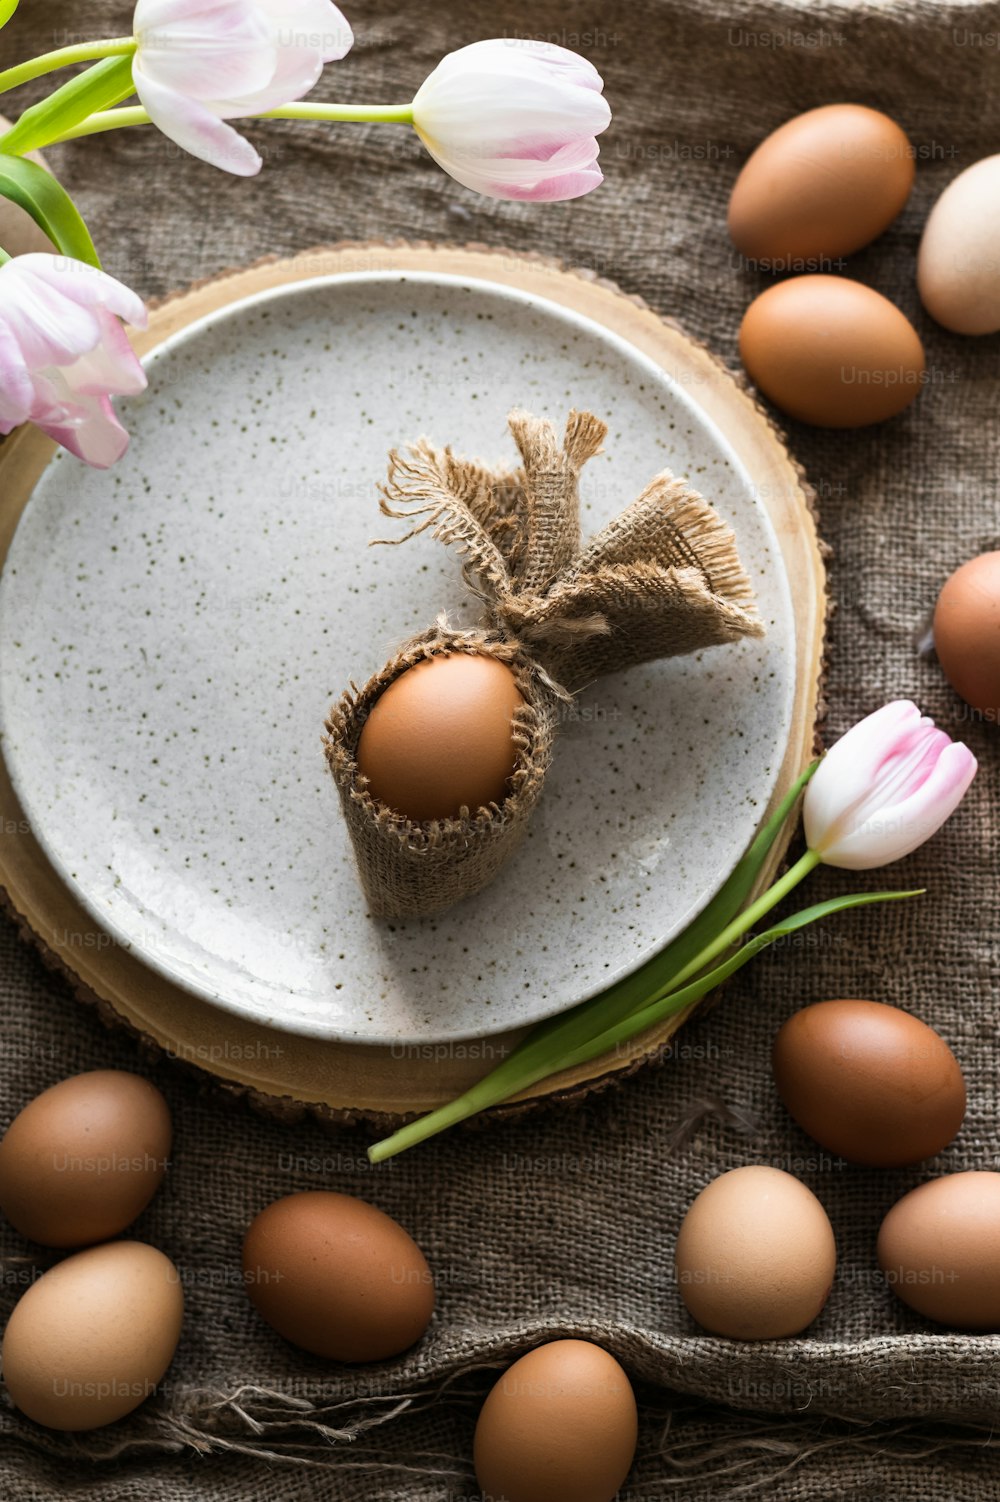 a plate with some eggs on it next to some flowers